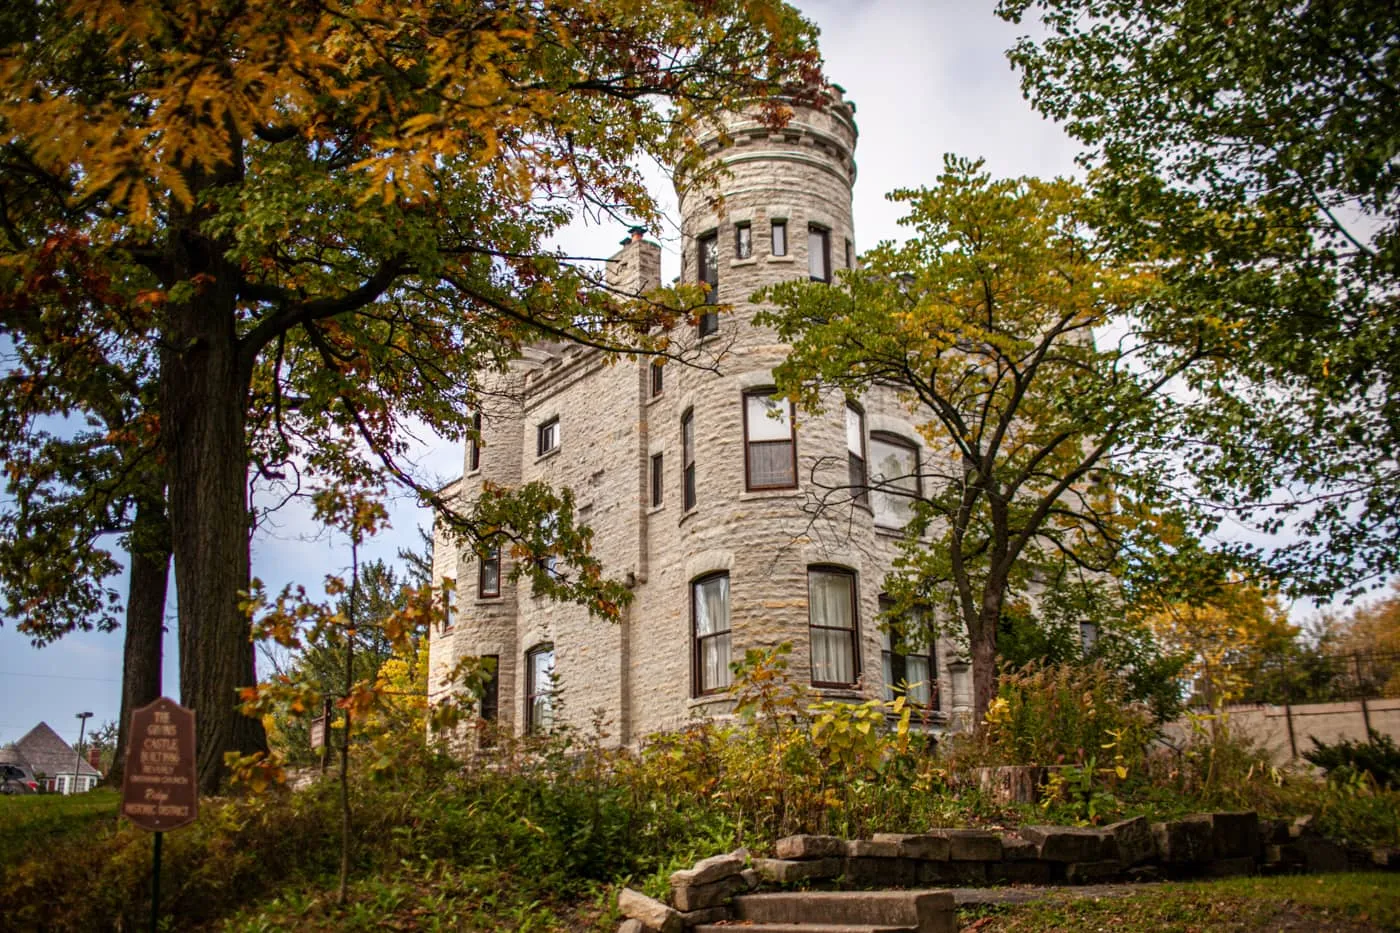 The Givins Castle in Chicago, Illinois. The only castle in Chicago. Open House Chicago.